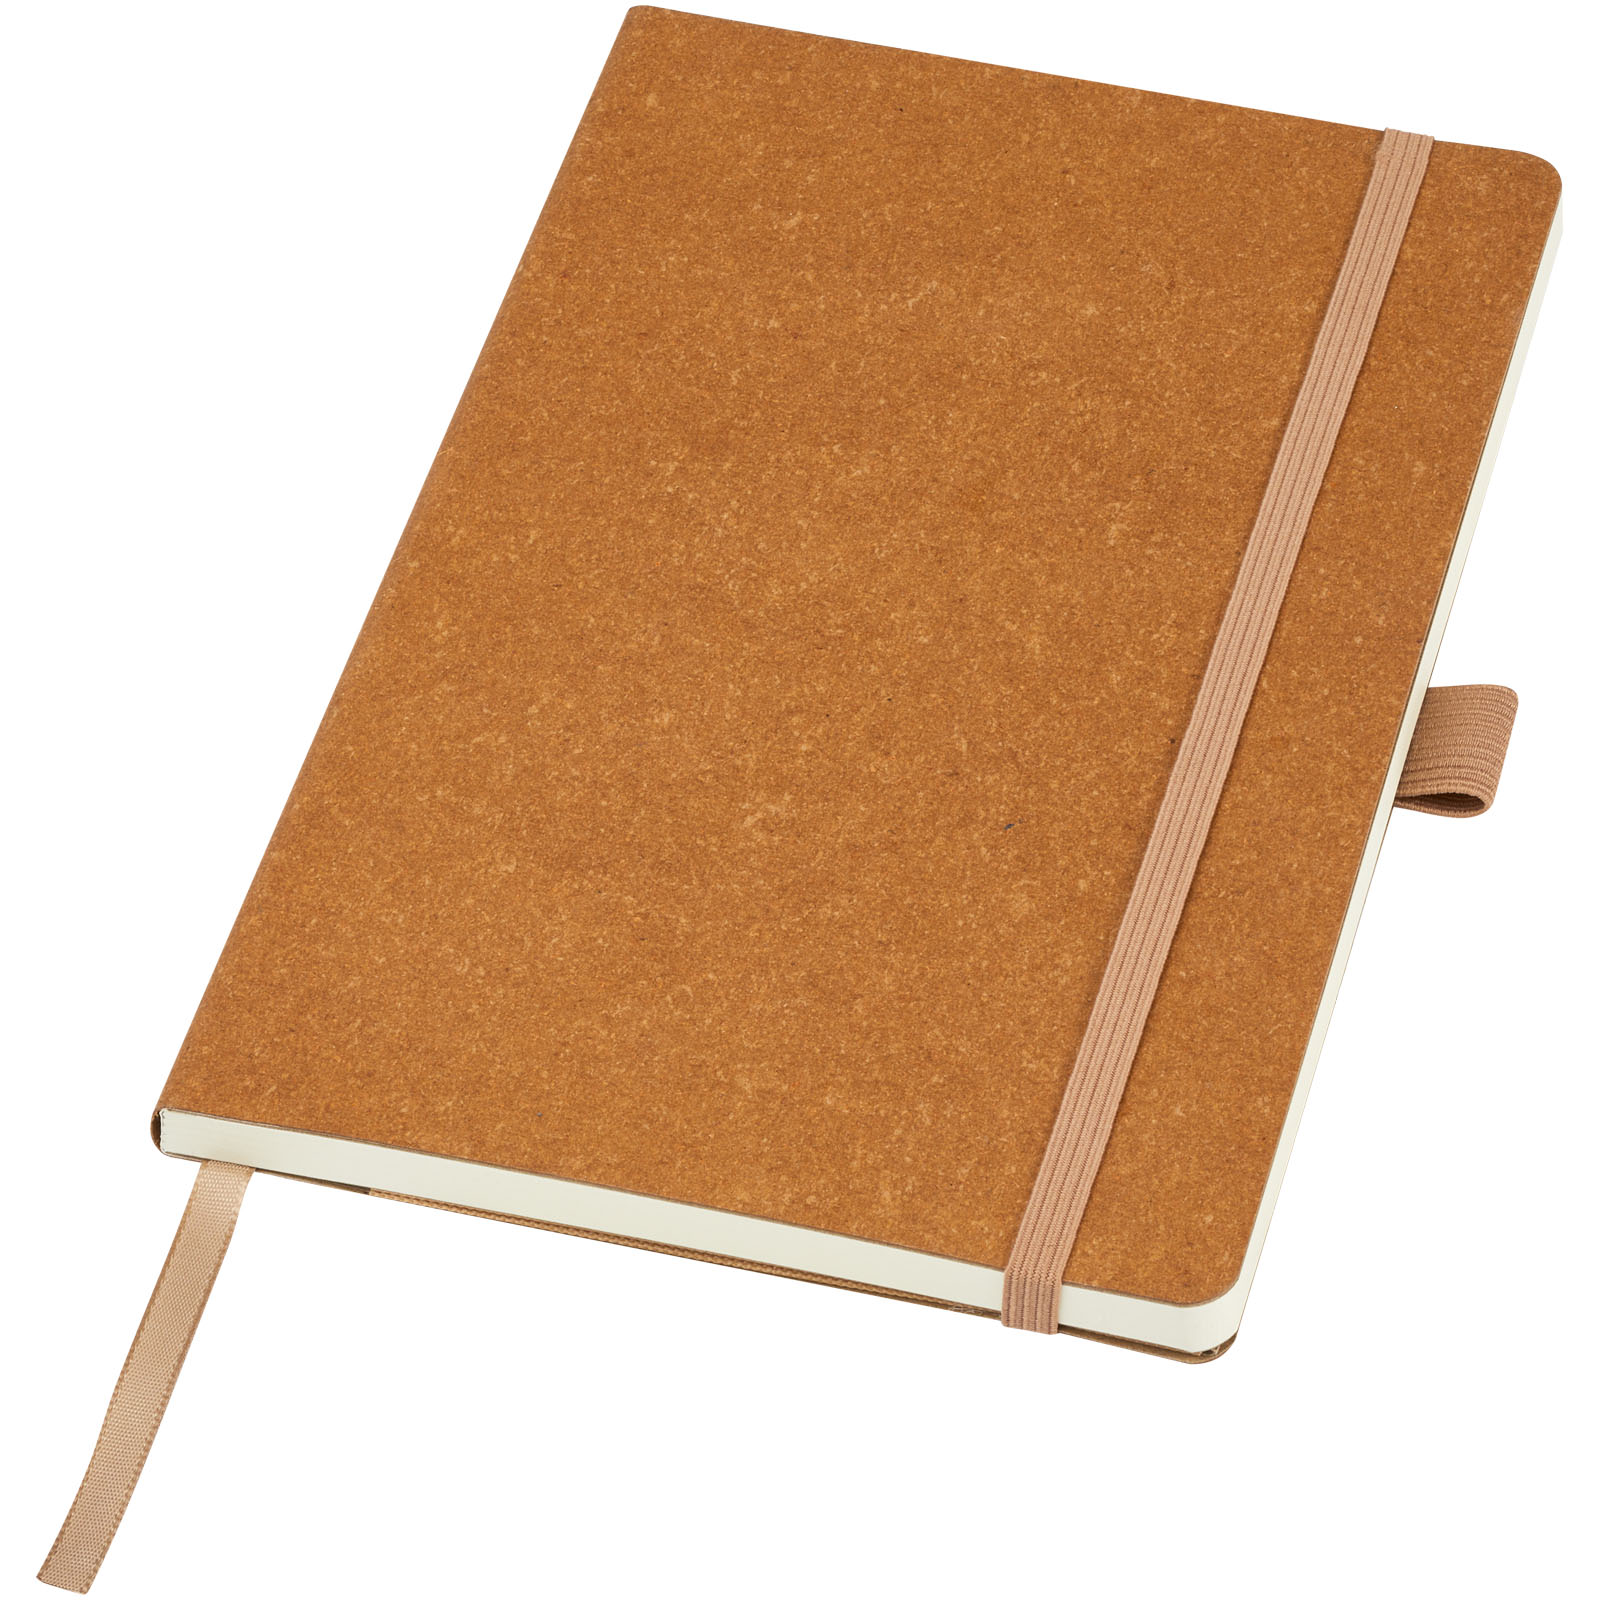 Soft cover notebooks - Kilau recycled leather notebook 